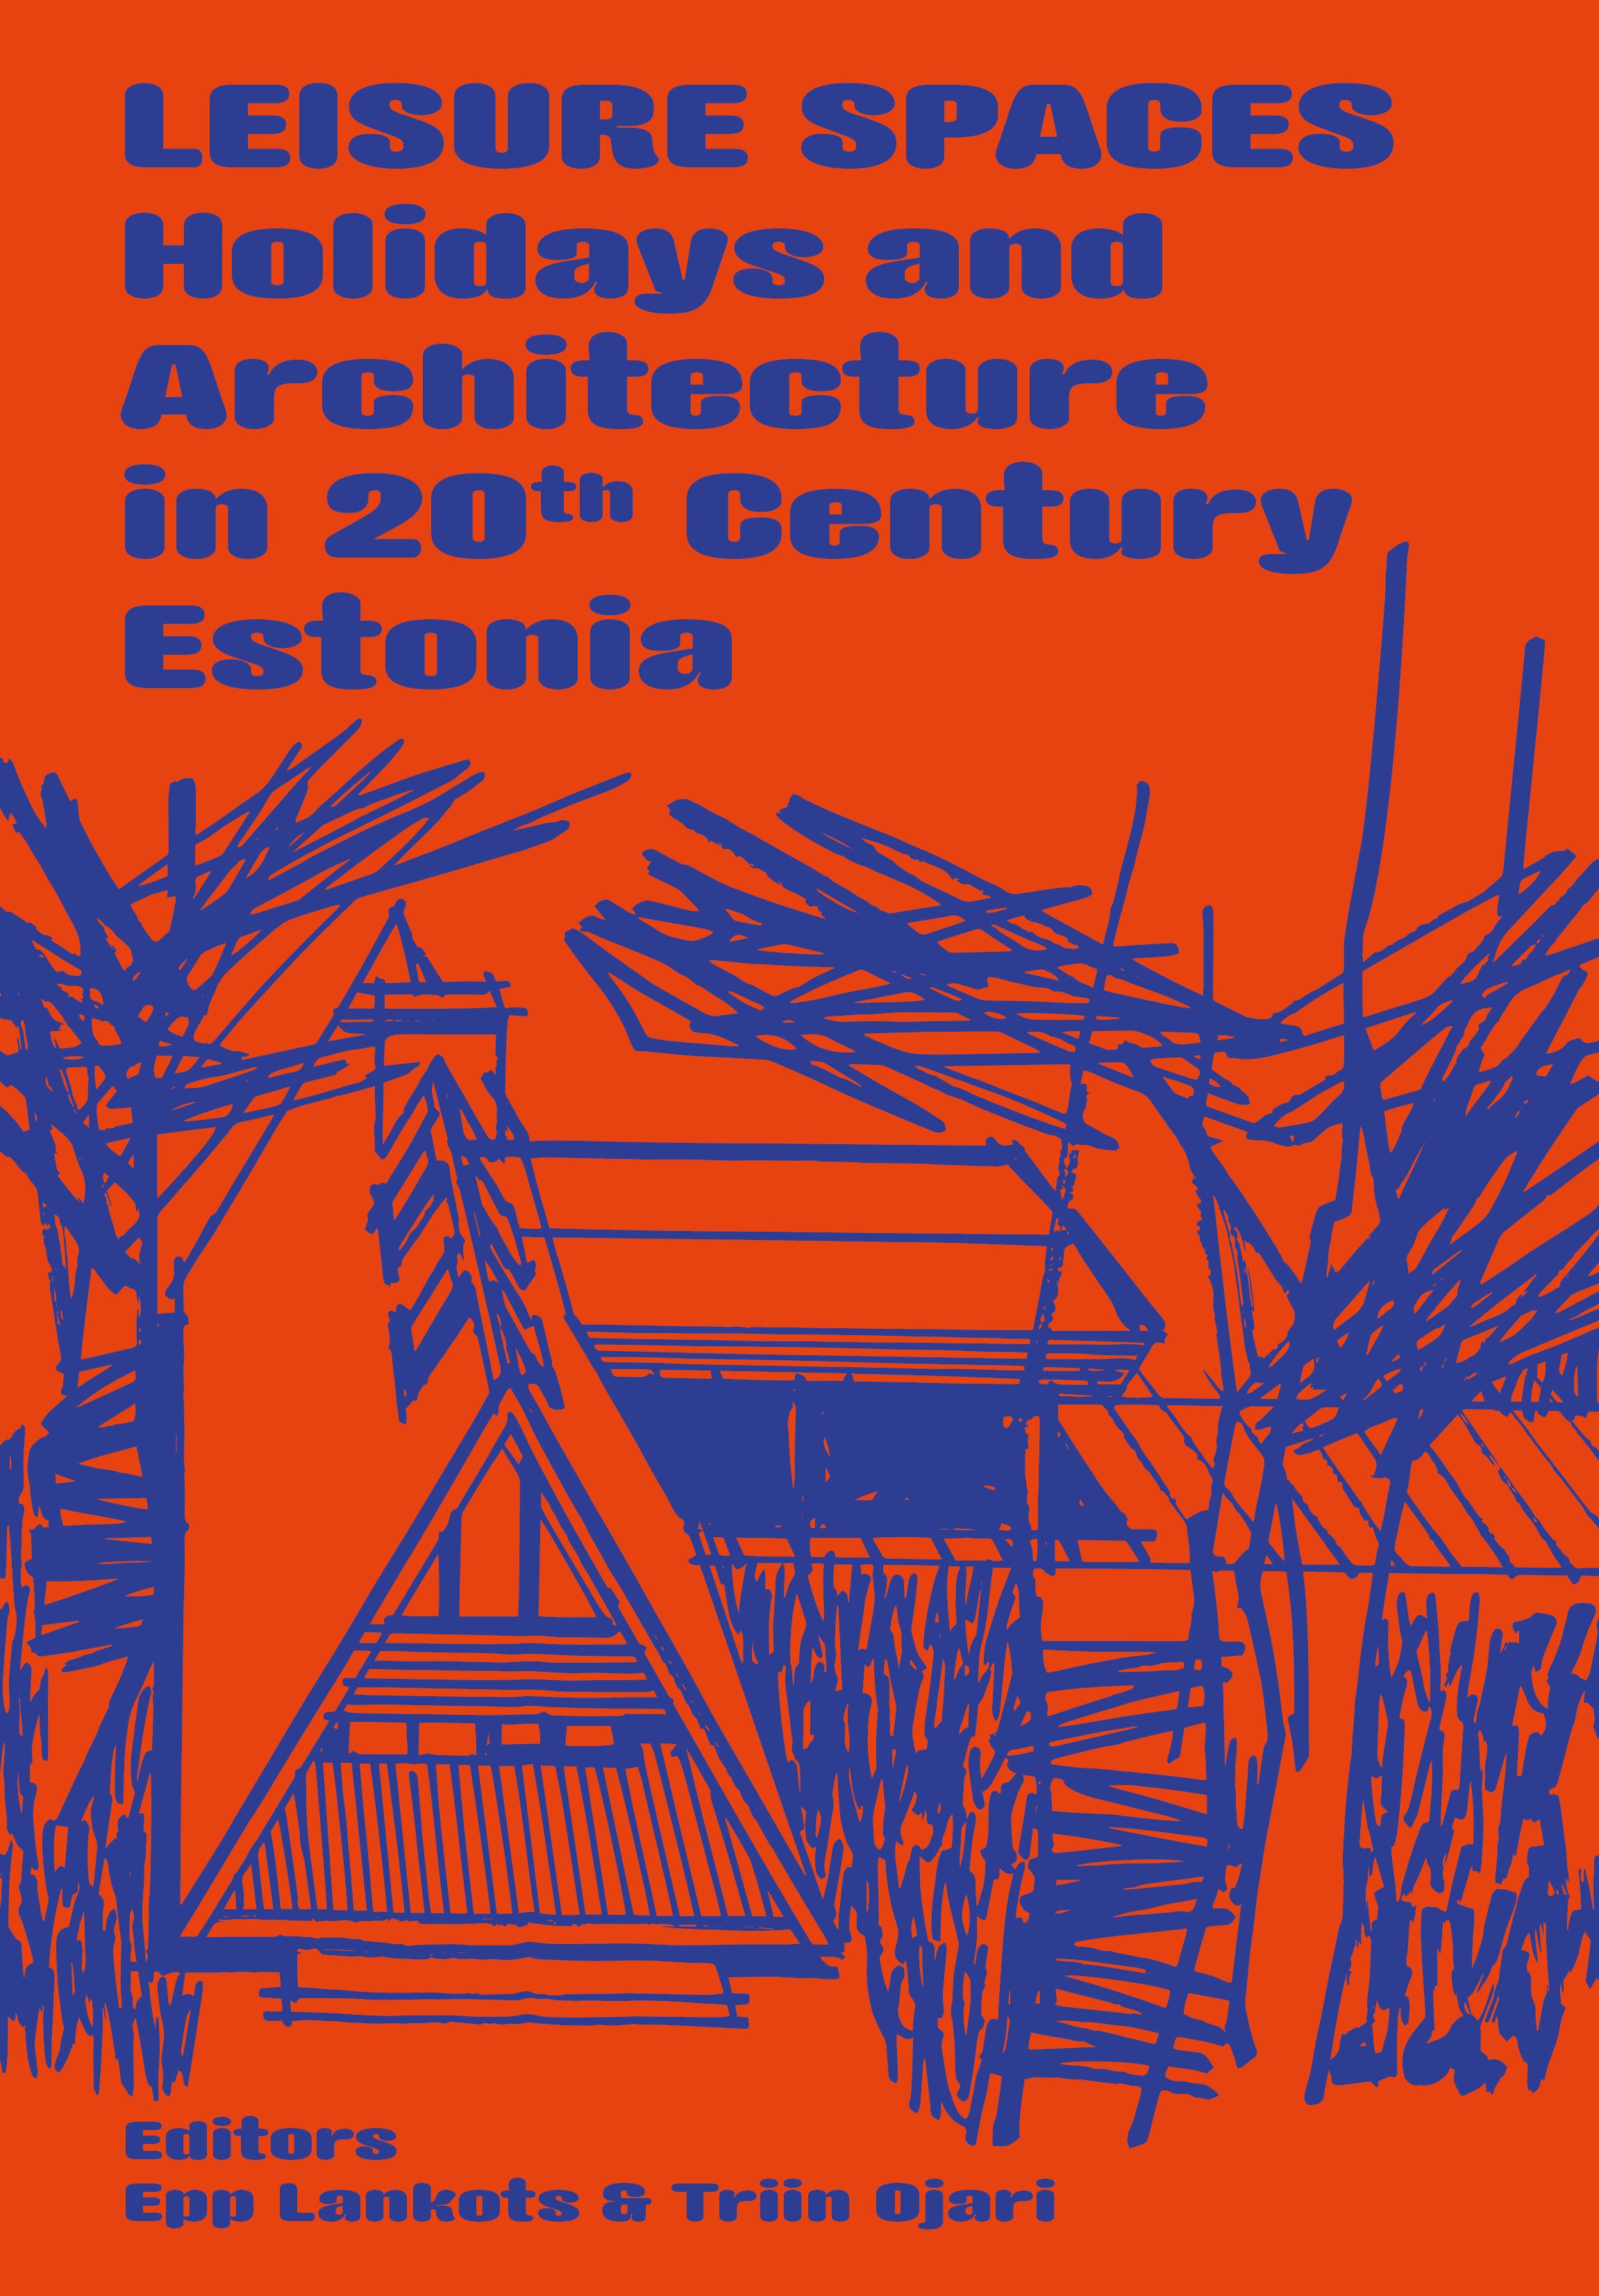 Leisure Spaces. Holiday and Architecture in 20Th Century Estonia